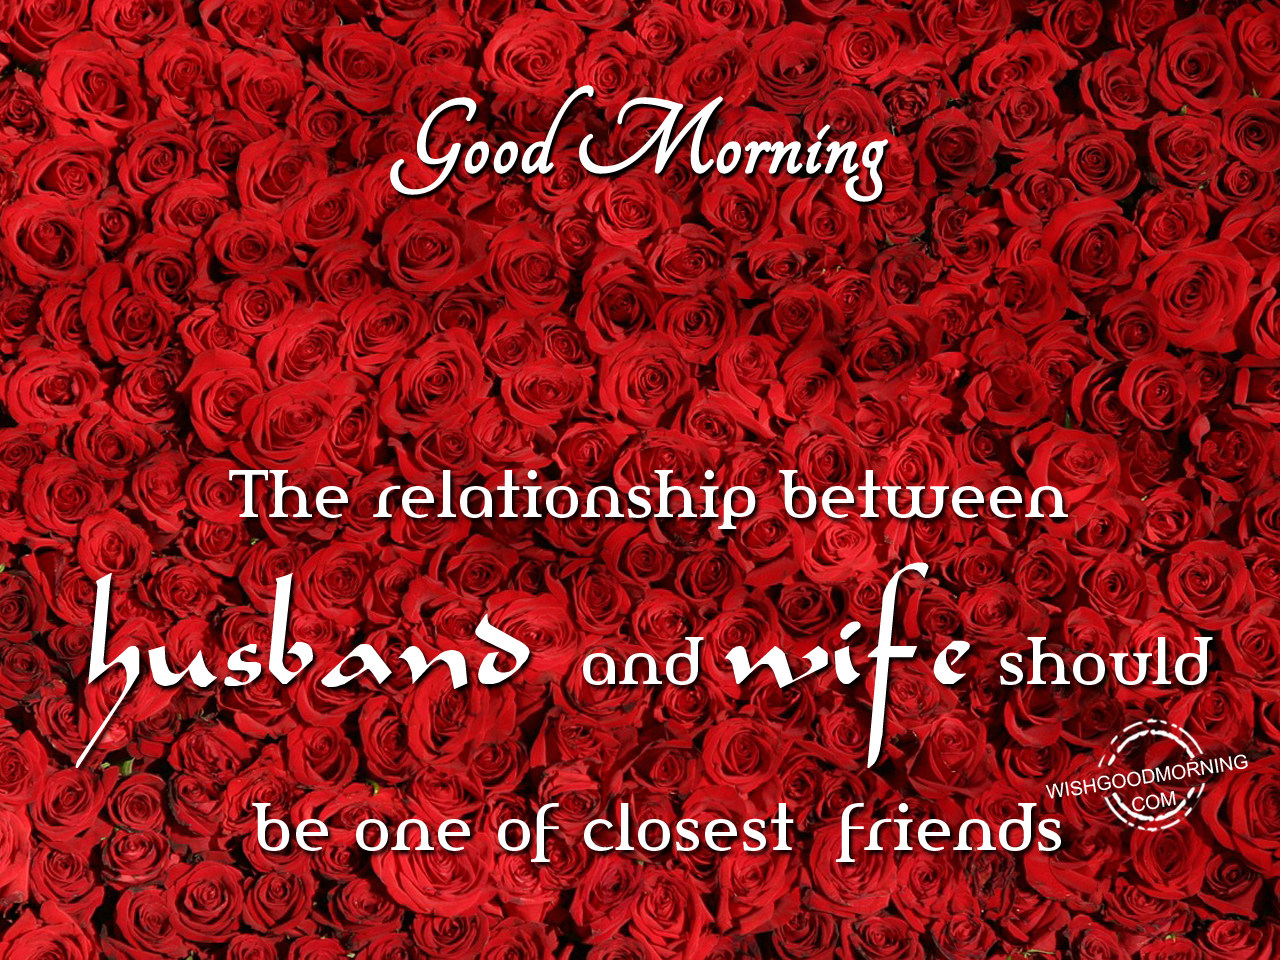 Husband and wife should be one of closest friends - Good Morning ...